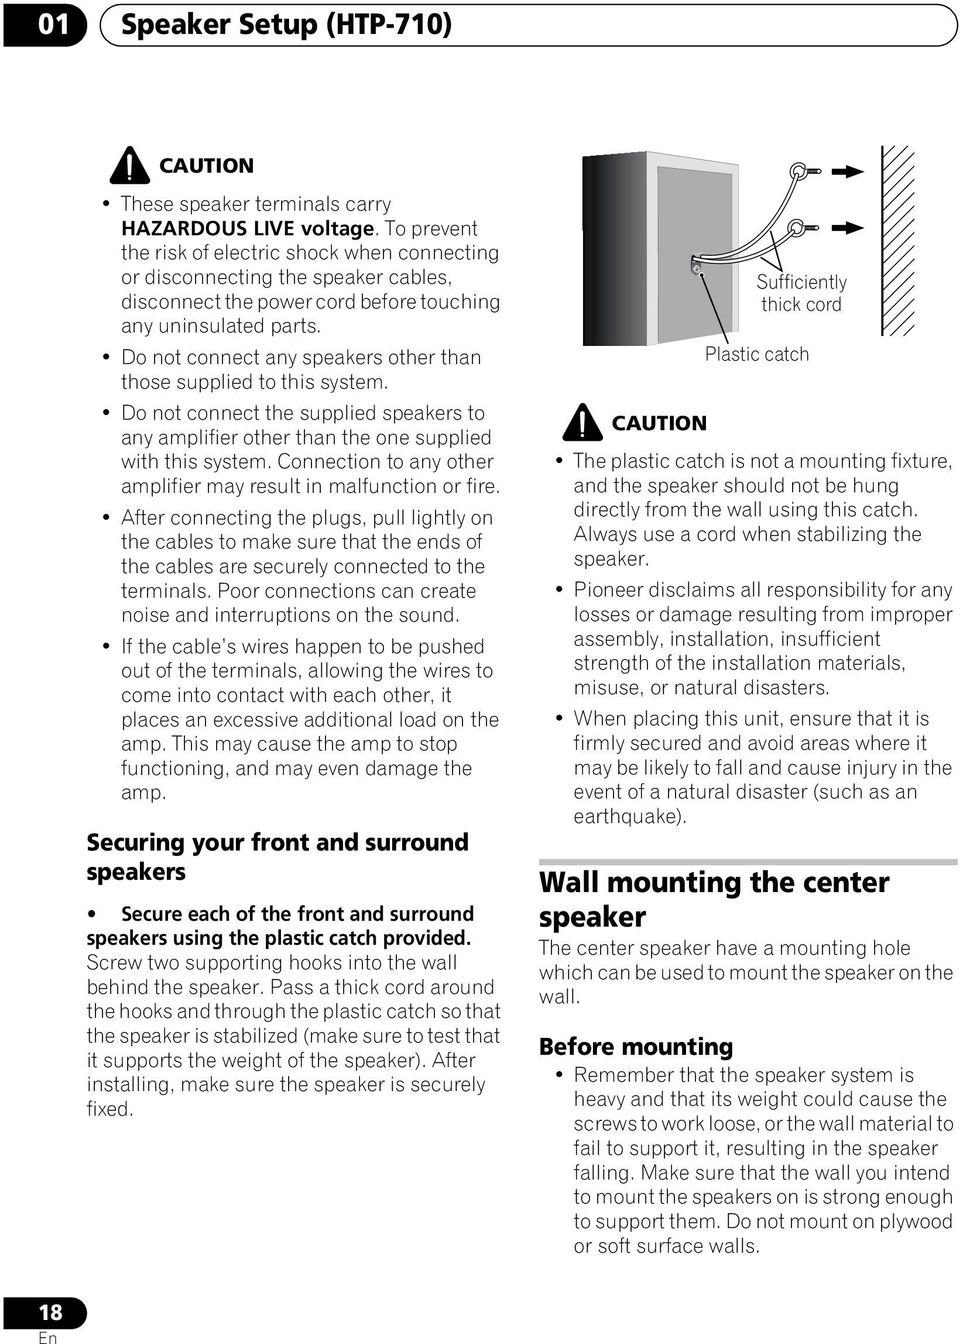 Do not connect any speakers other than those supplied to this system. Do not connect the supplied speakers to any amplifier other than the one supplied with this system.